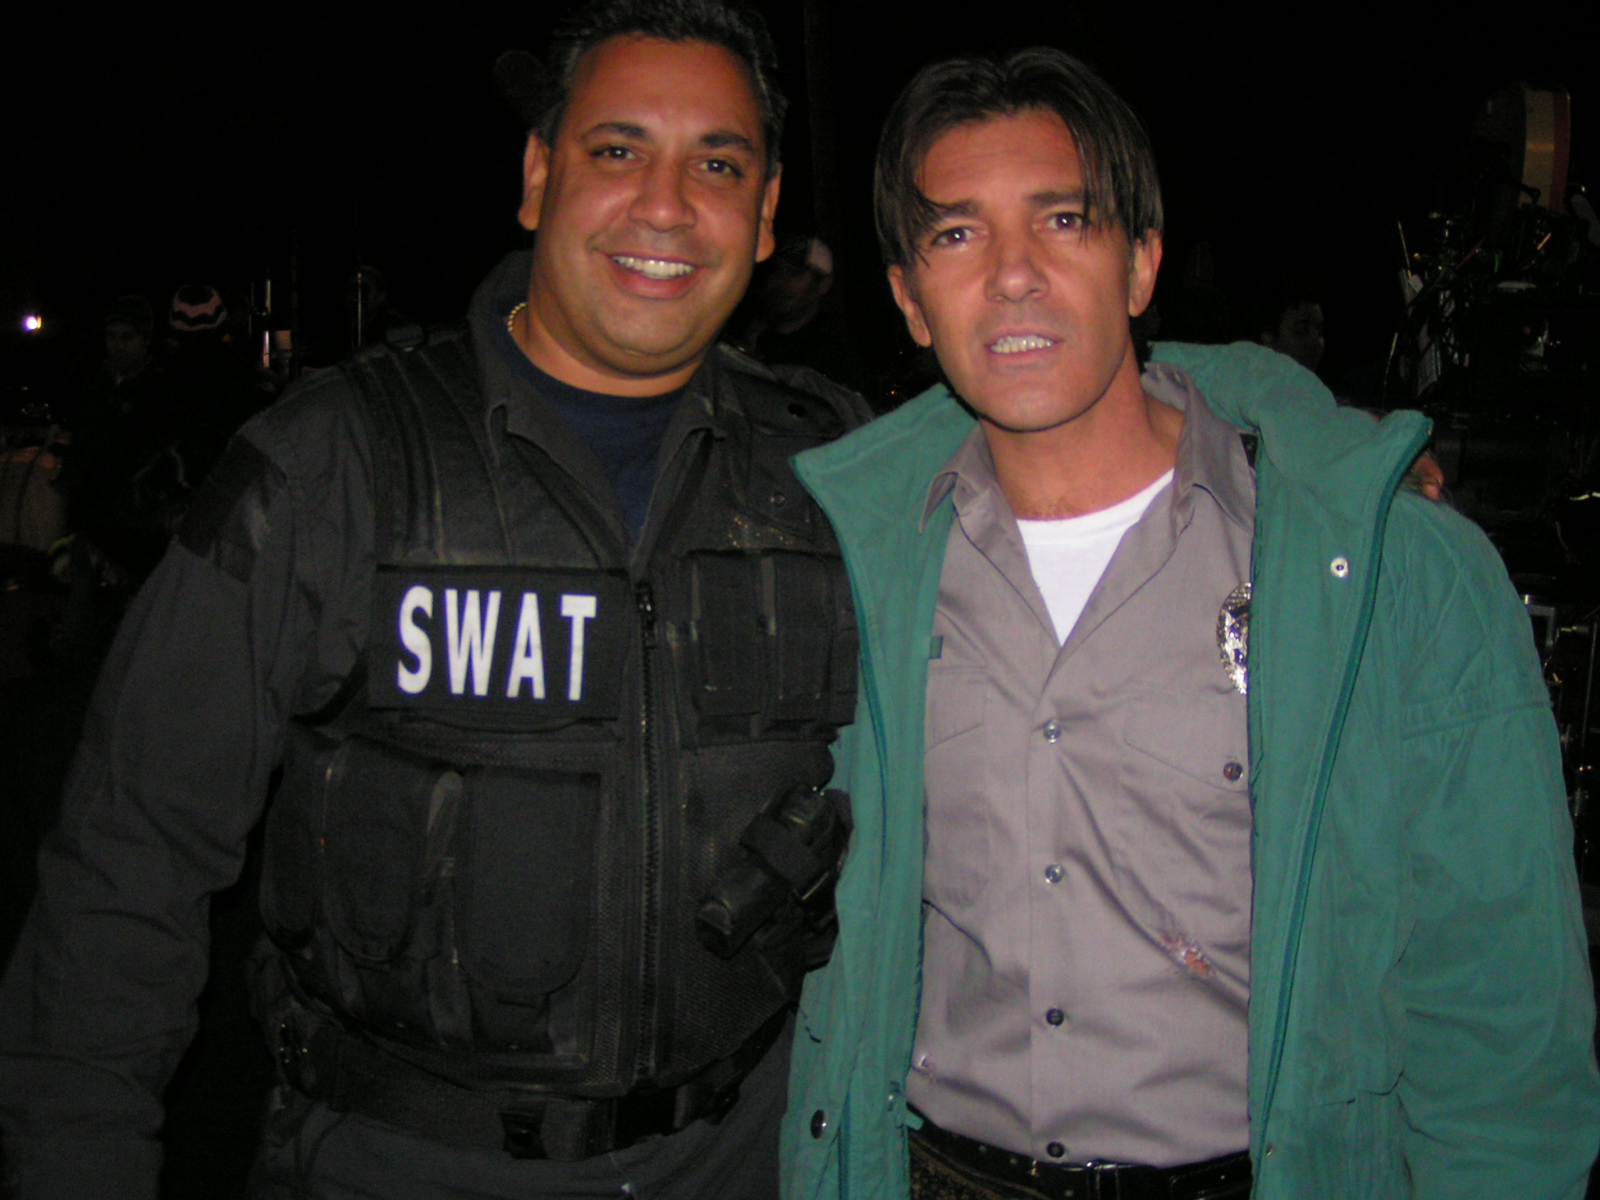 On the set Of My Moms New Boyfriend (To the Left Richard F Law to the Right Antonio Banderas)